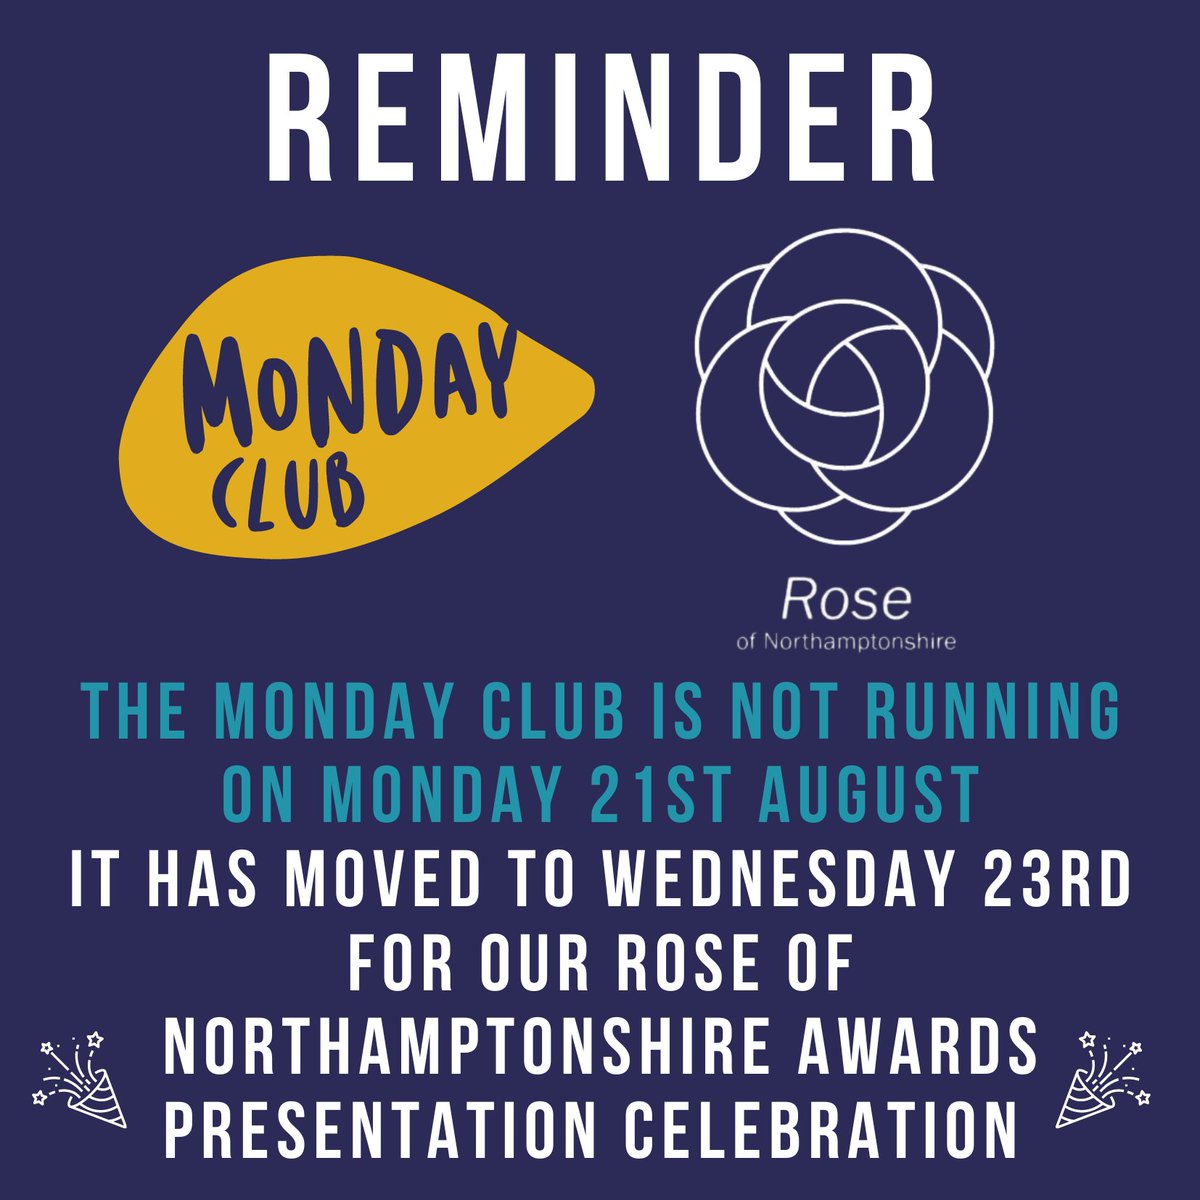 Reminder that our #MondayClub is on Wednesday this week for our #RoseOfNorthamptonshire awards presentation celebration! It'll be a great afternoon, celebrating those who have supported our community 💛

Be sure to join us from 12-4pm!

#tmdf #mccarthydixon #northampton